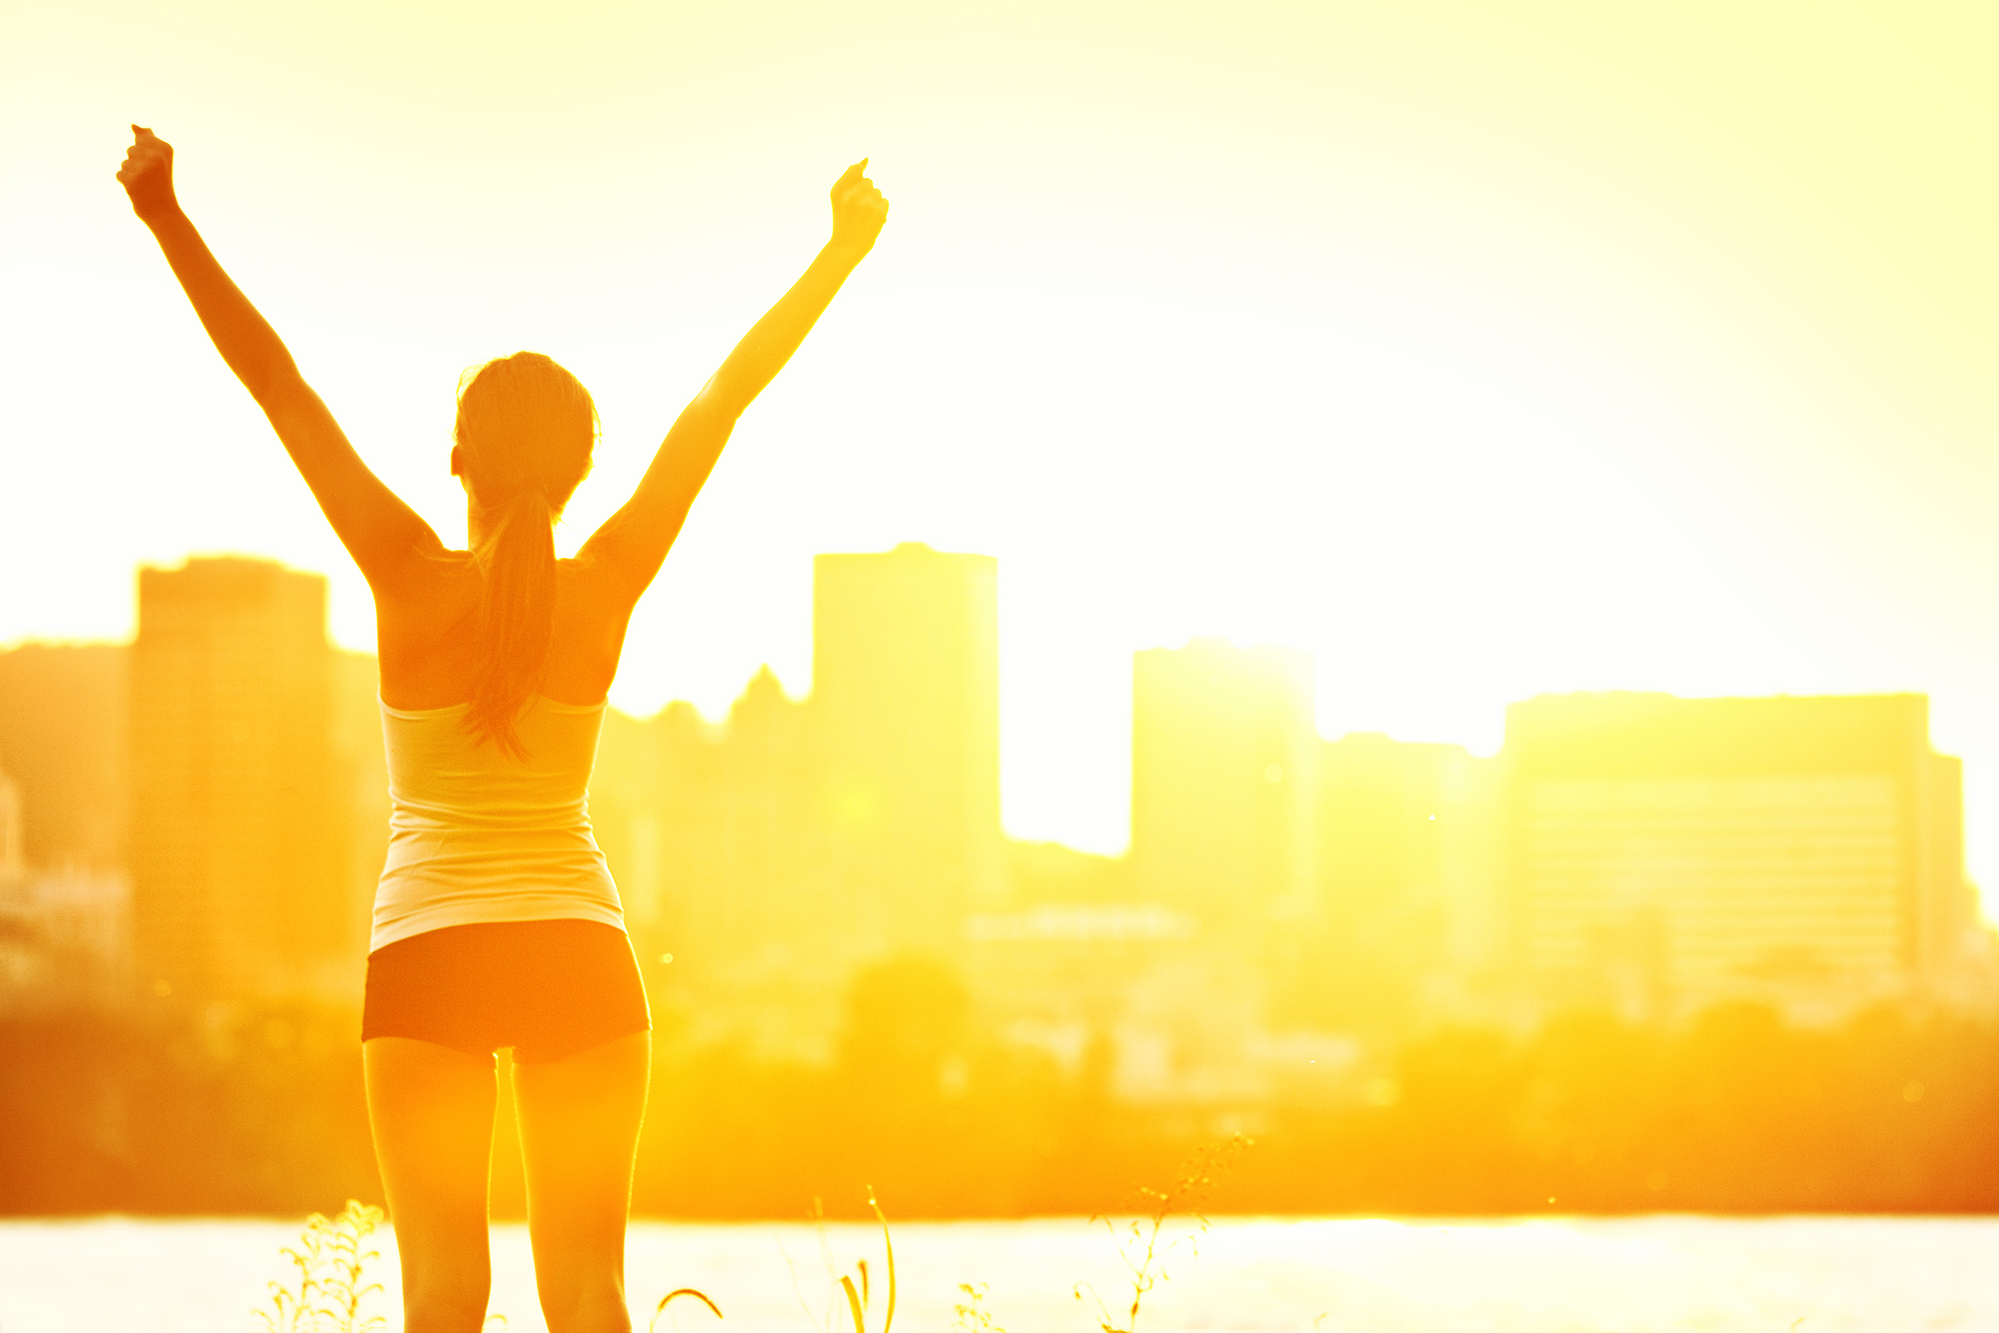 Healthy woman standing with arms up joyful after outdoors workout. Half silhouette on sunny warm summer day with city skyline in background, From Montreal, Quebec, Canada.